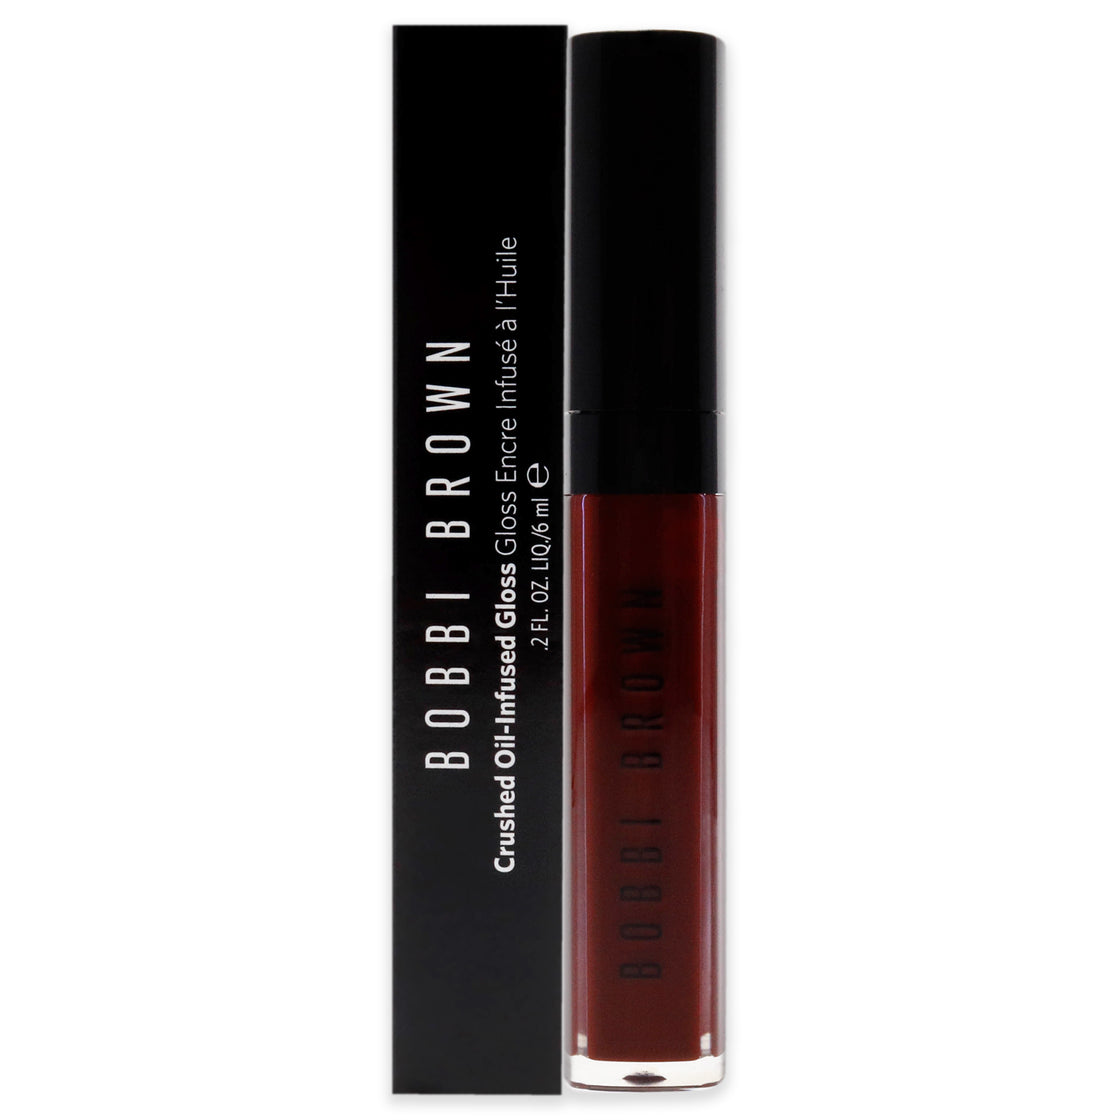 Crushed Oil-Infused Gloss - After Party by Bobbi Brown for Women - 0.2 oz Lip Gloss